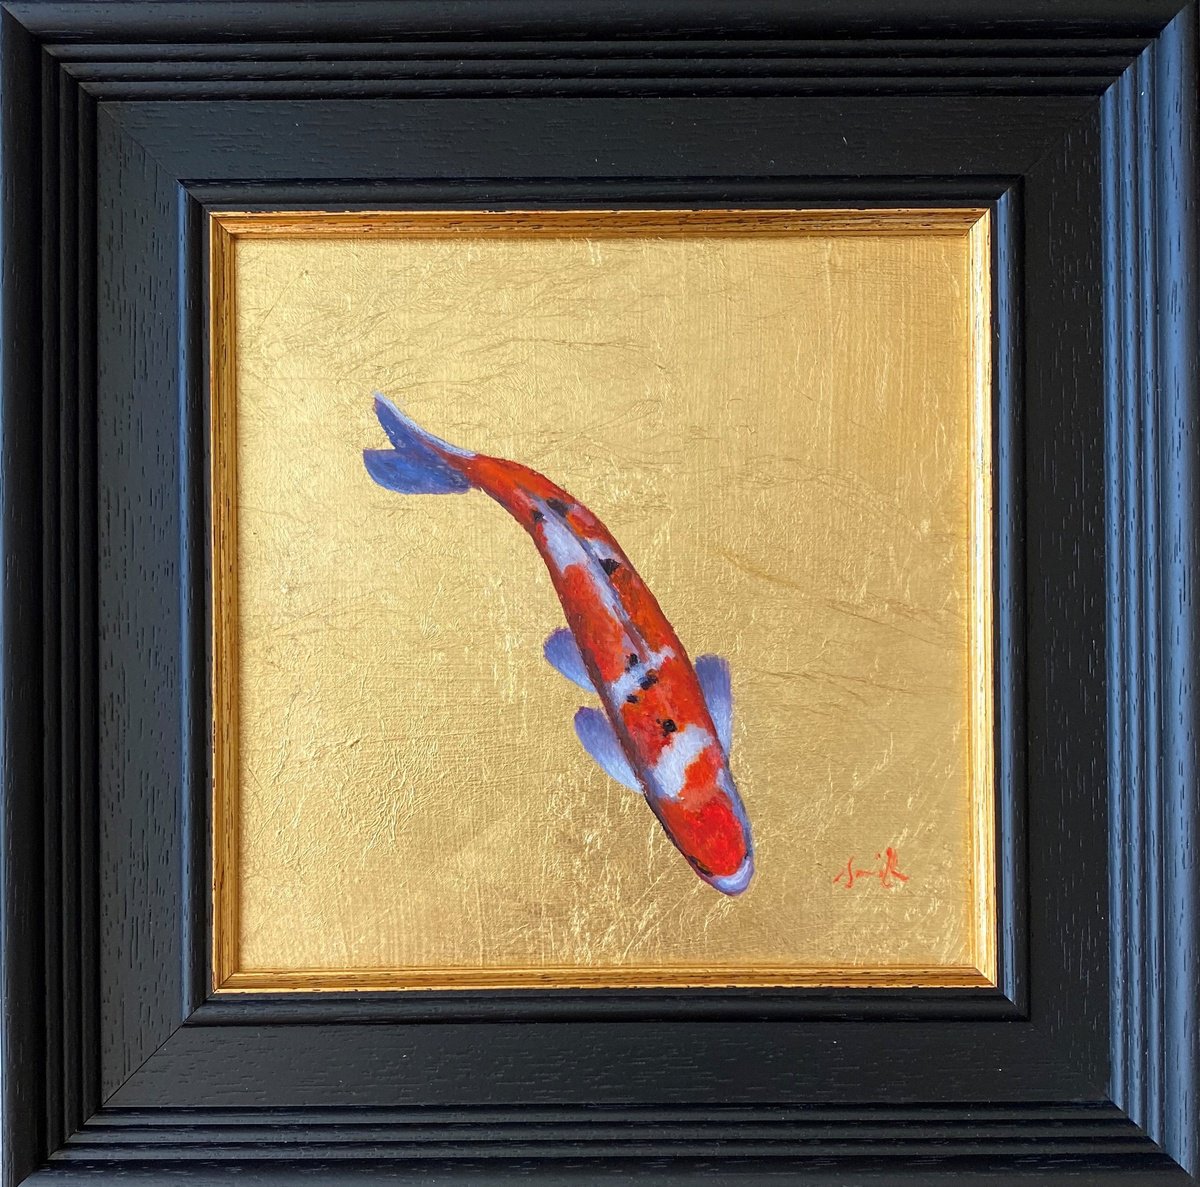 Solo Koi Carp Fish with Gold Leaf. by Jackie Smith